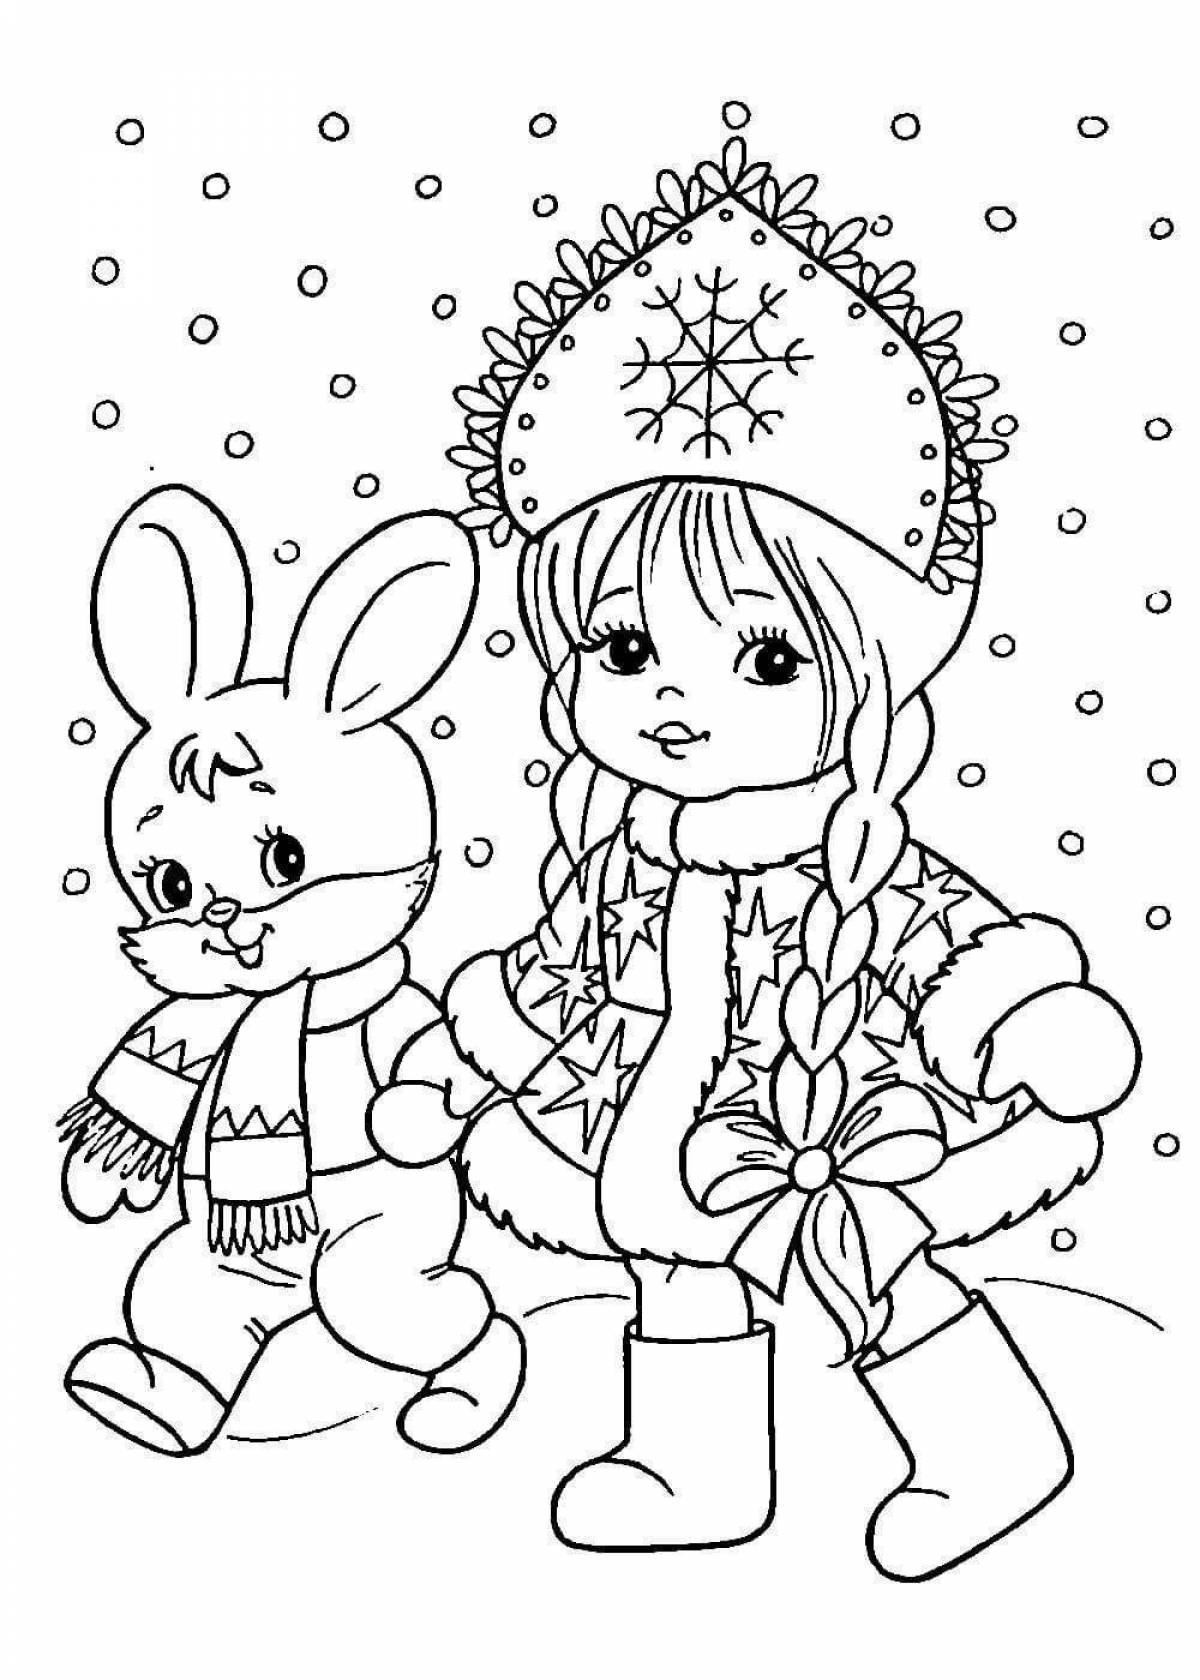 Coloring page violent Snow Maiden and Lel